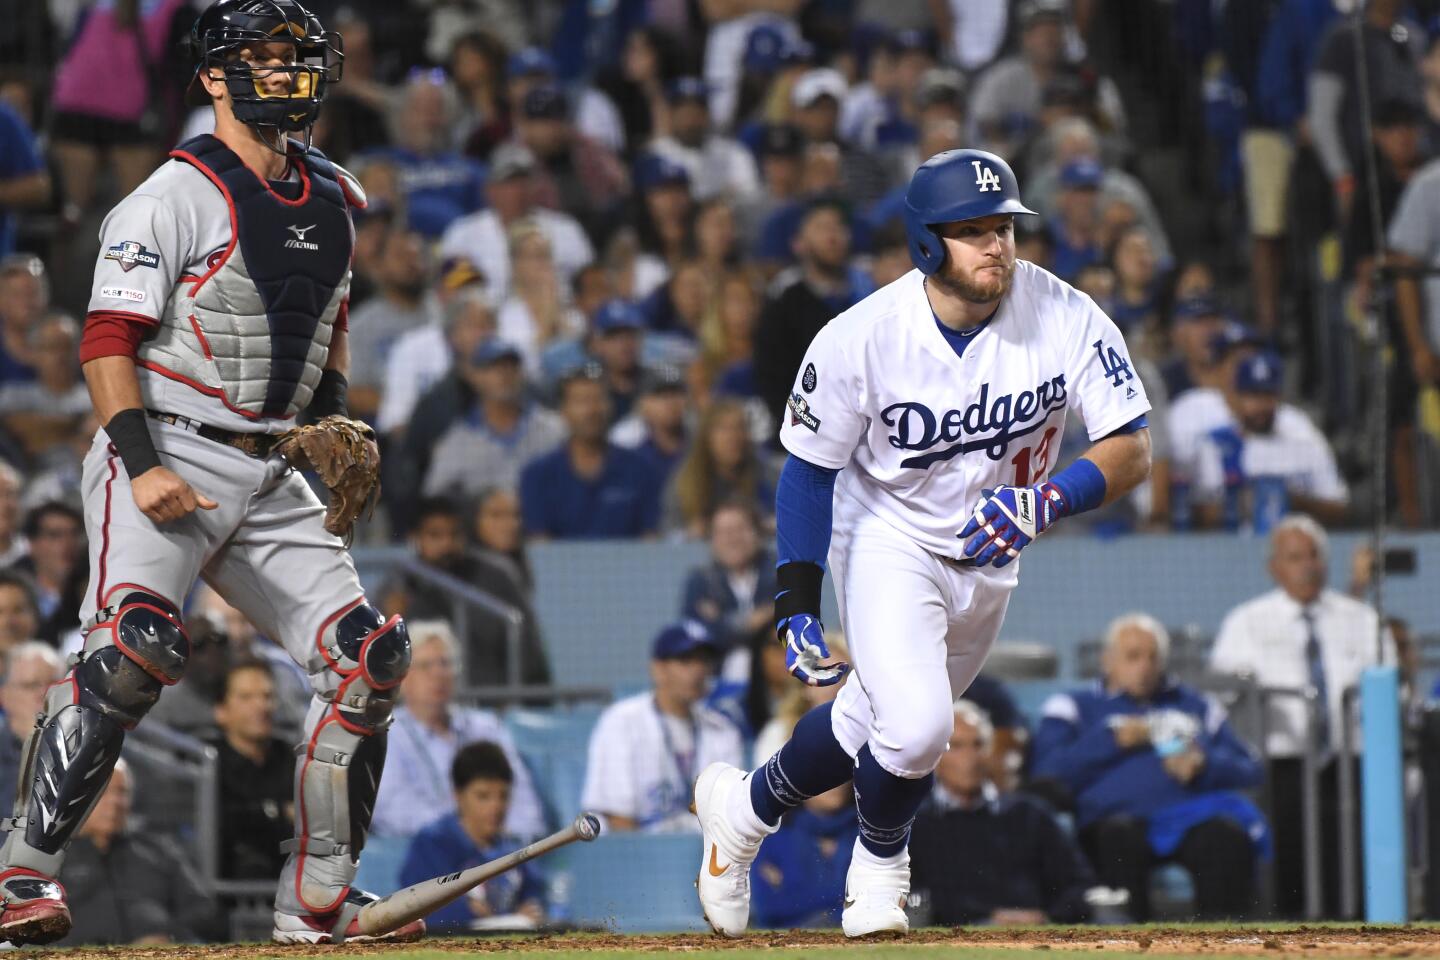 Dodgers second baseman Max Muncy hits a run-scoring double against the Nationals in the fifth inning.